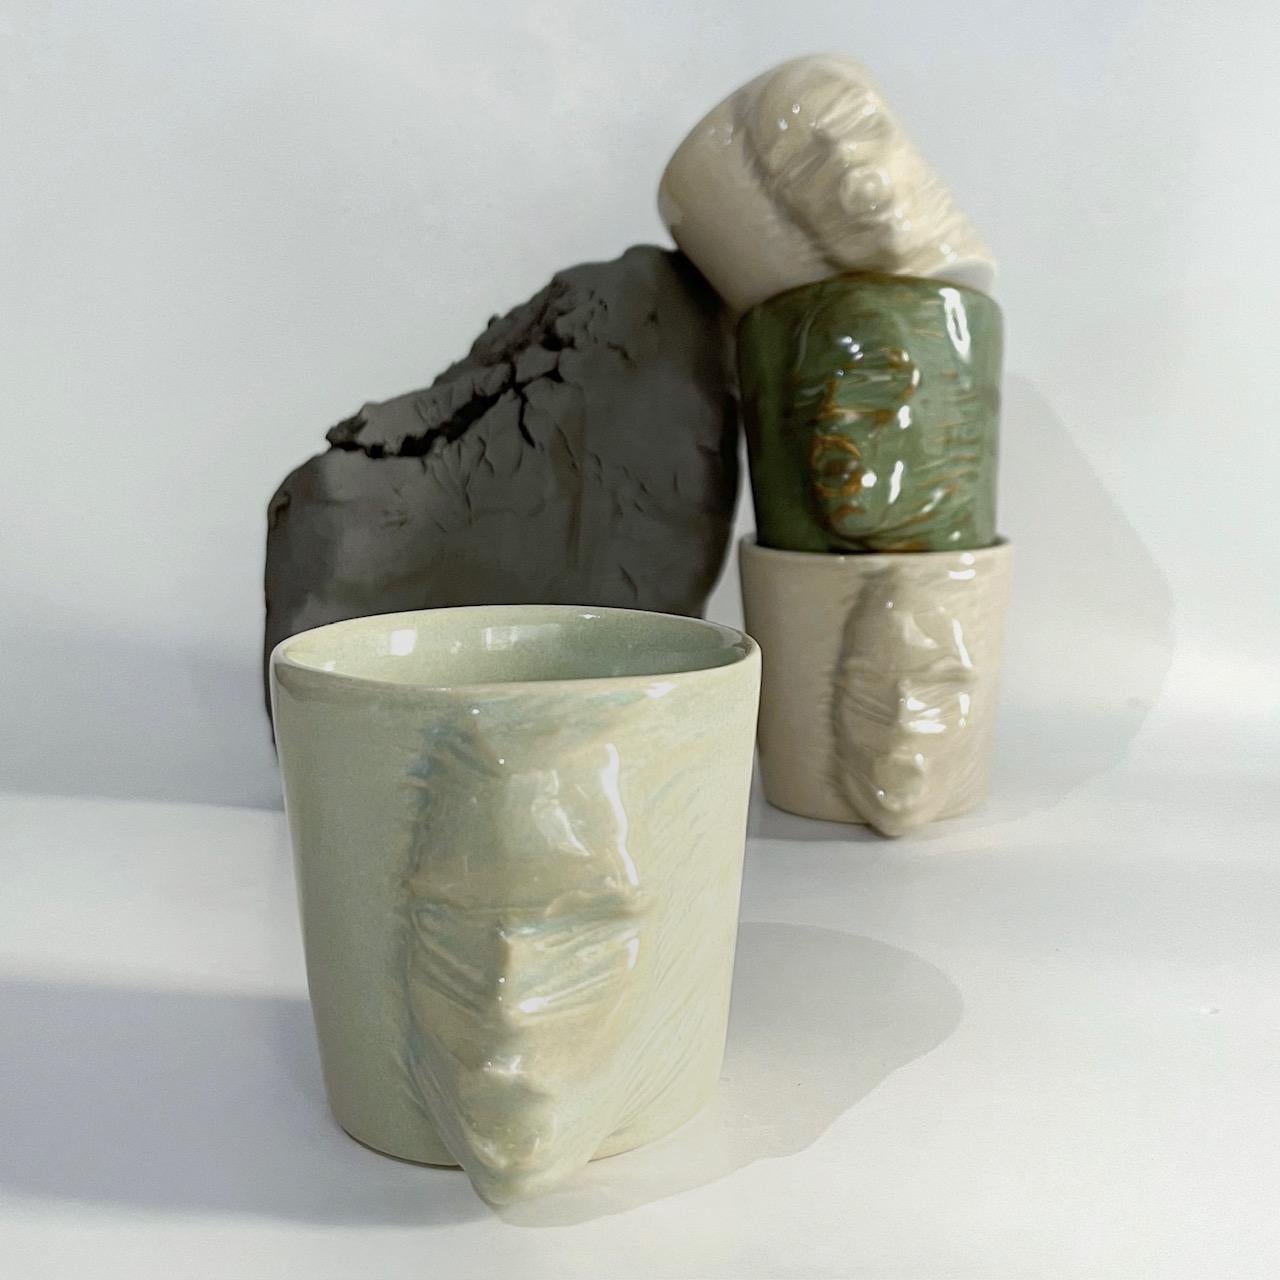 A set of 4 sculptural ceramic cups handmade by the ceramic artist Hulya Sozer. 
Food safe glaze.
Dishwasher safe.

Height: 7cm / Depth: 9cm / Diameter: 7cm
Volume: 120ml
Set includes 4 ceramic cups of 120ml

* Colors may slightly vary due to every